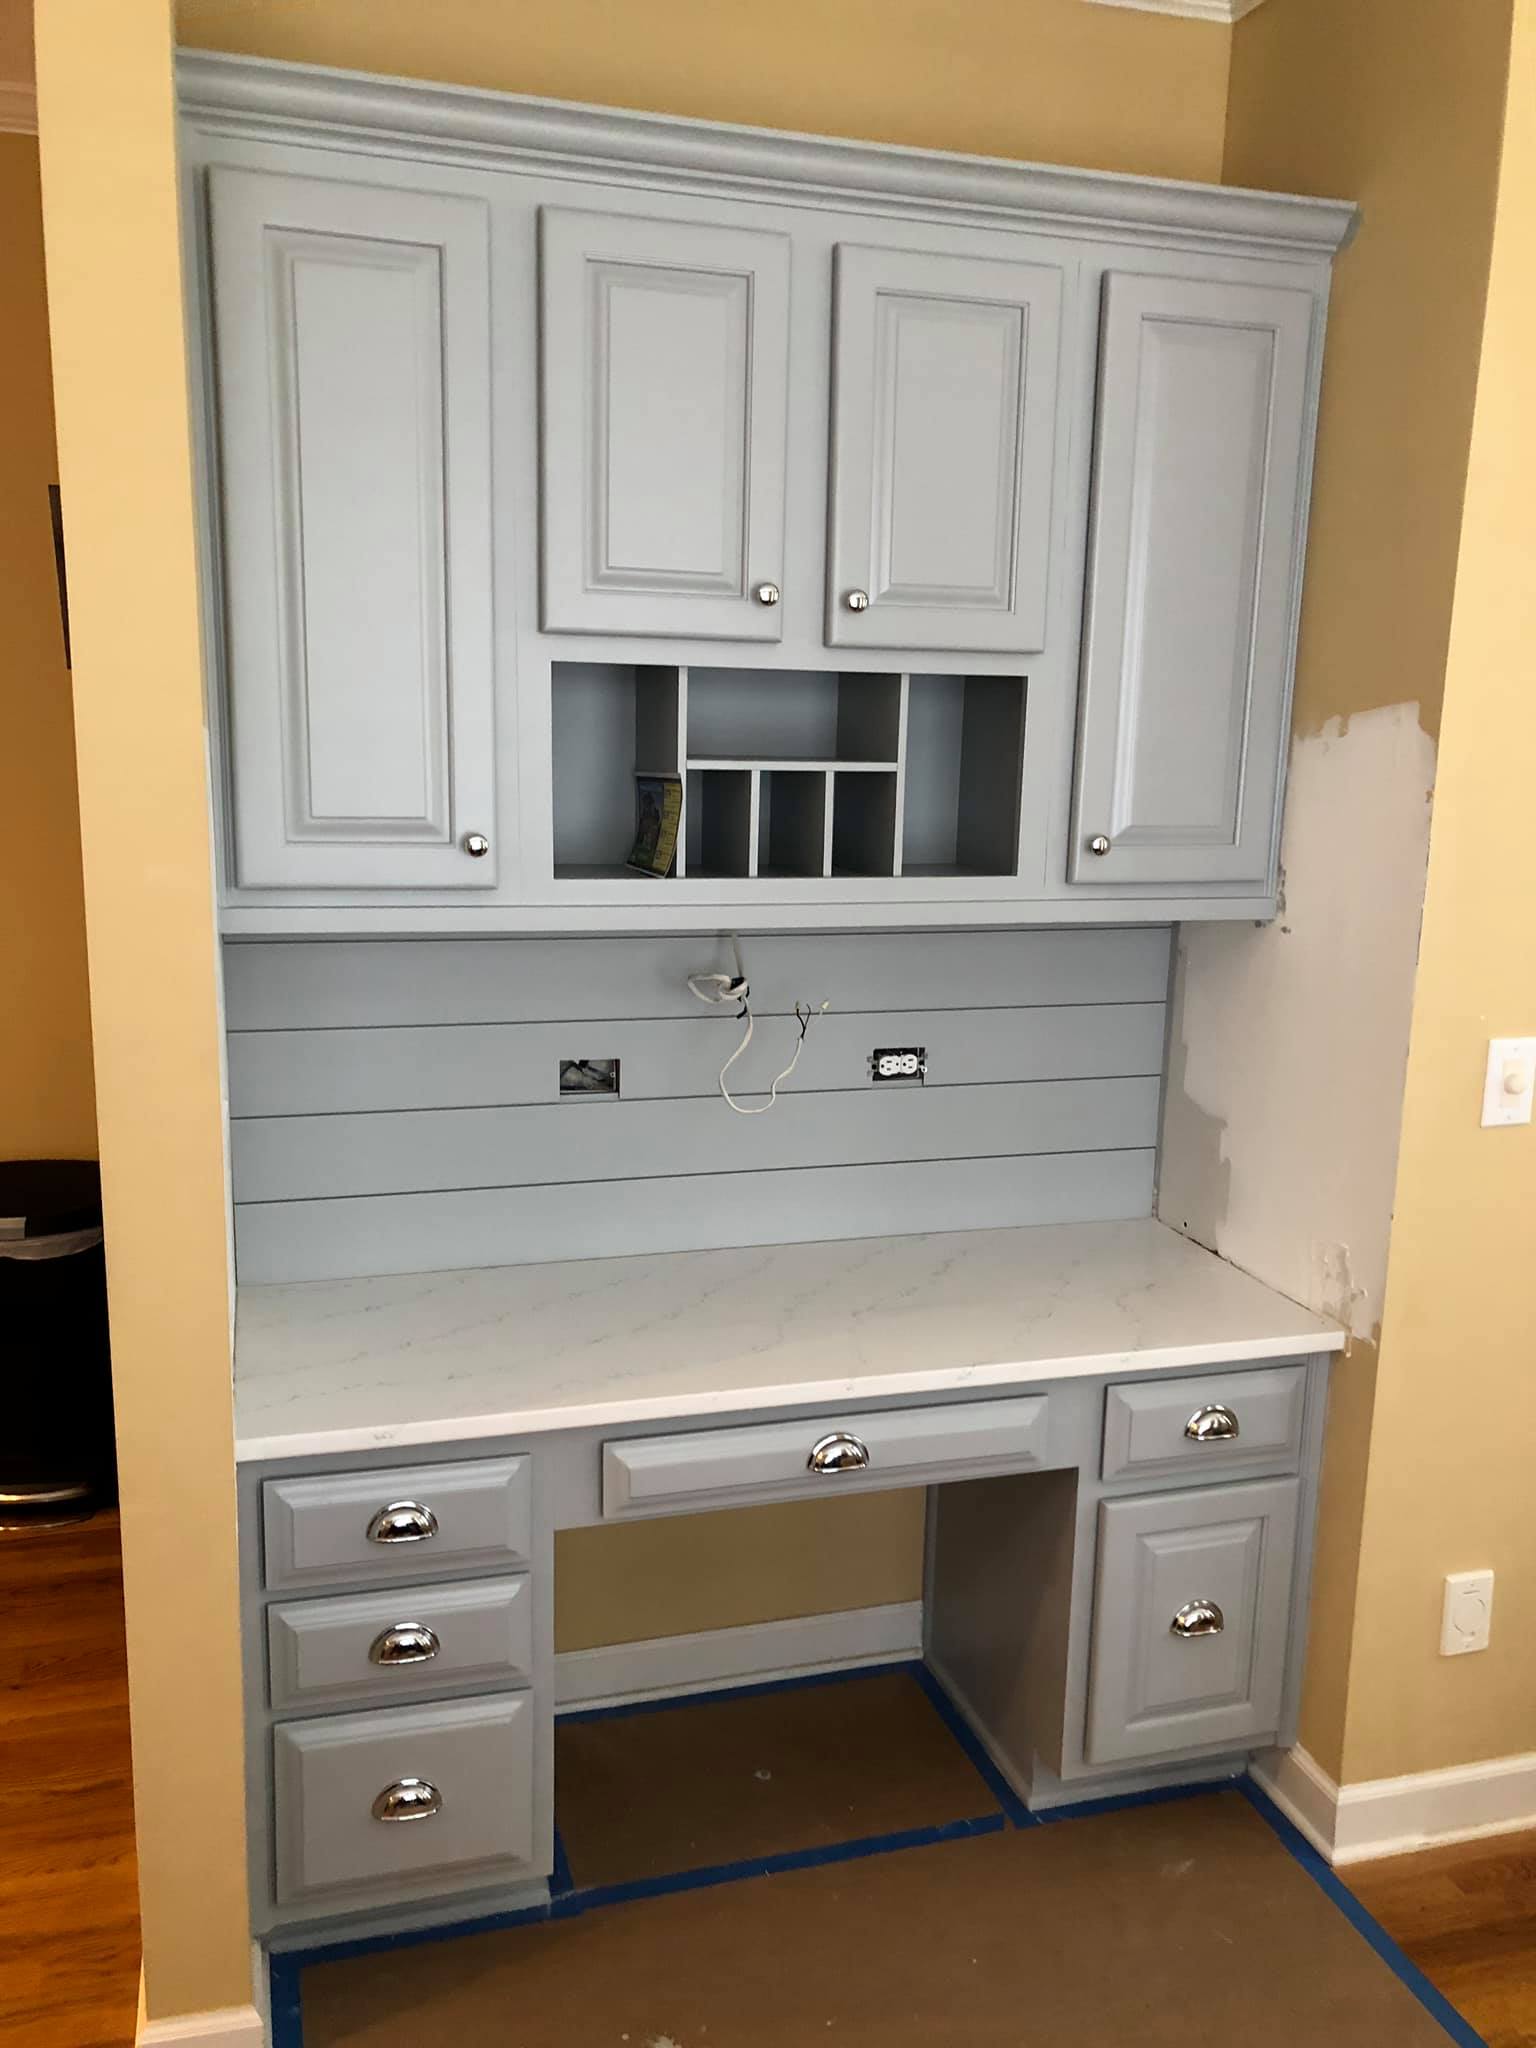 Custom Wall Mounted Cabinets with Slots and Shiplap Walls and Desk with Drawers